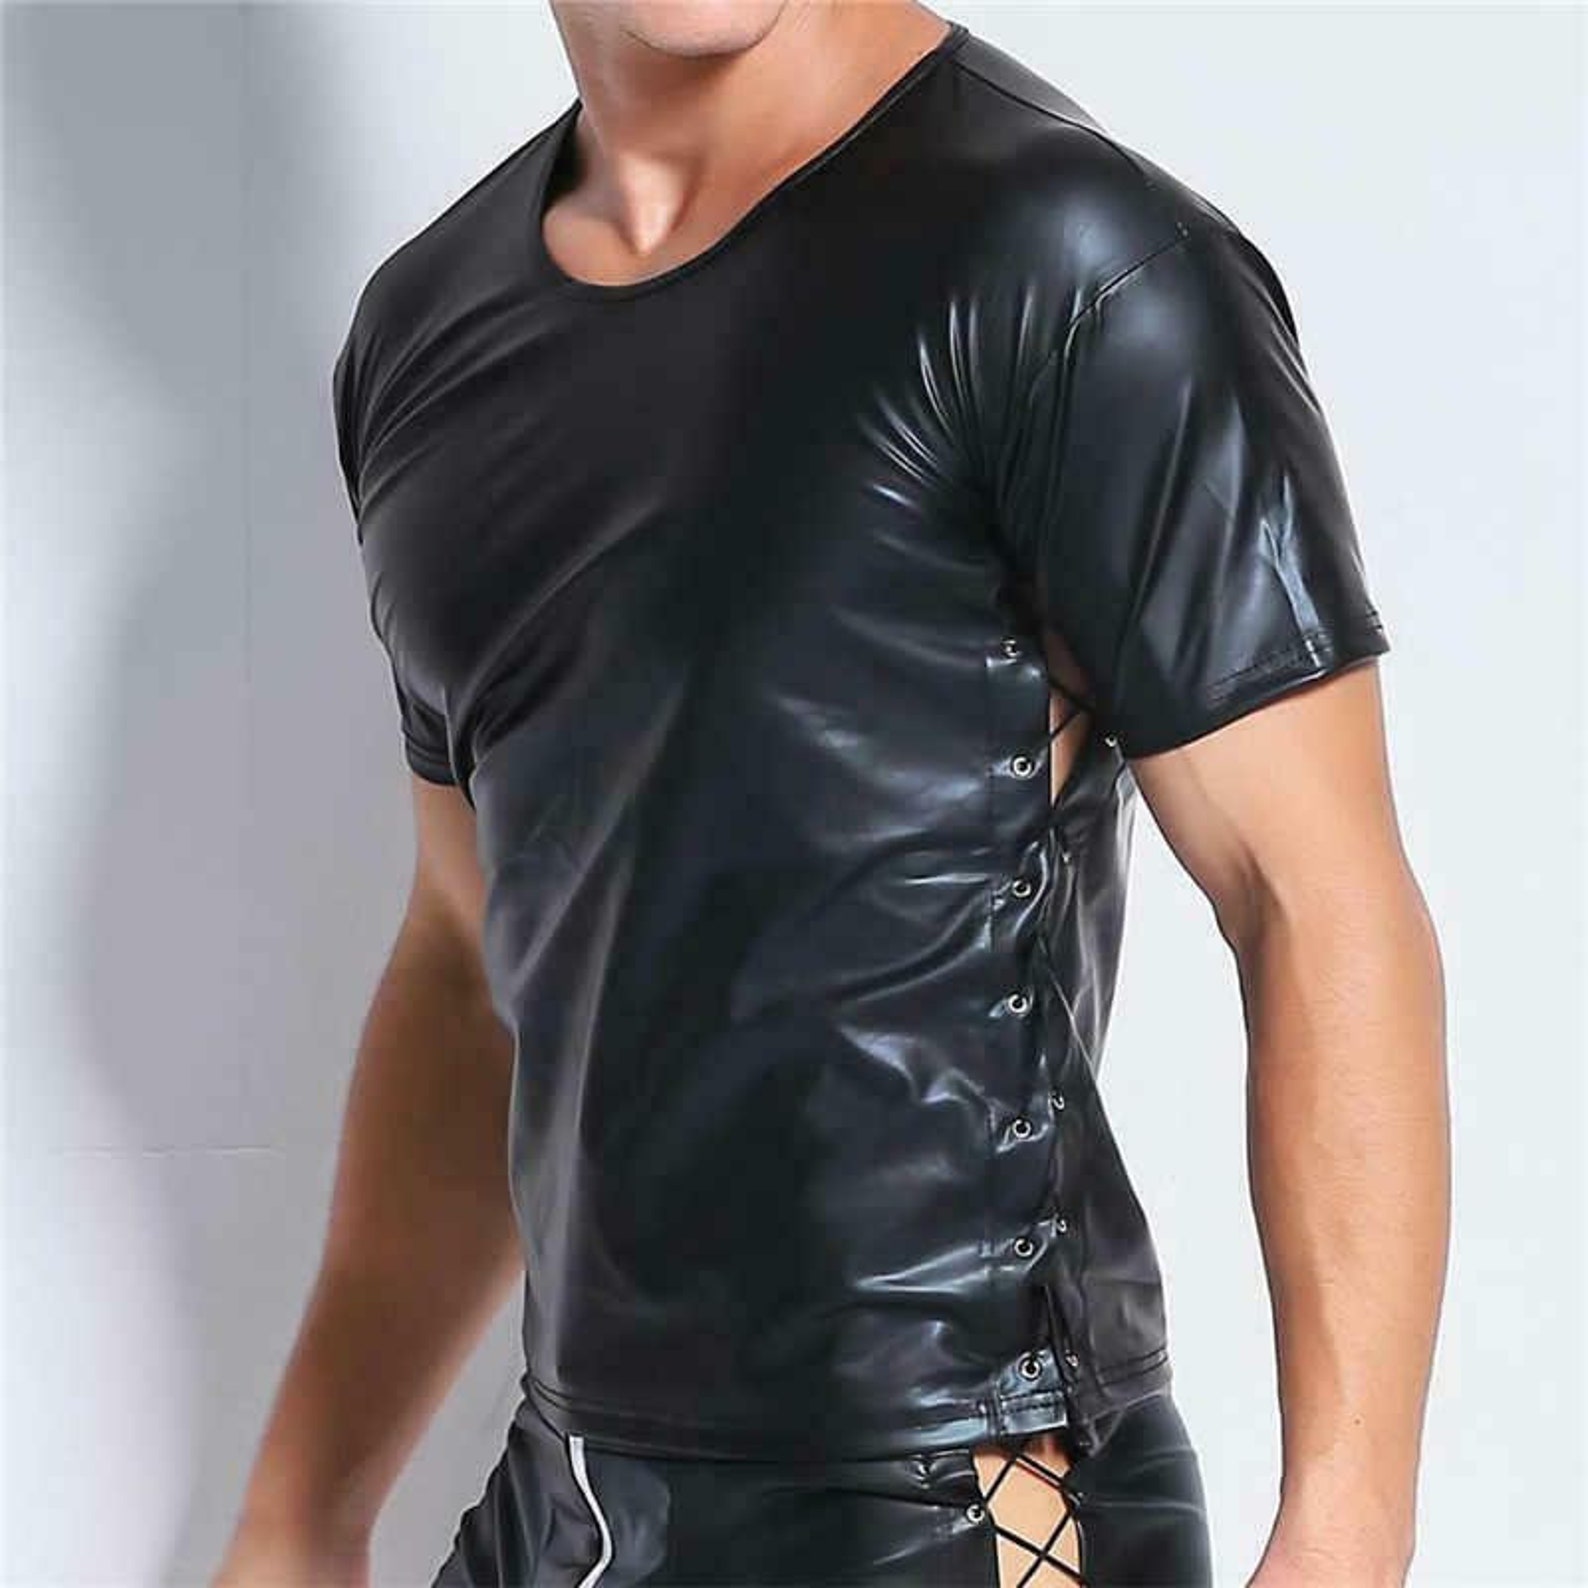 Sexy Gay Lace up Patent Leather Men's T-shirt Club-wear | Etsy